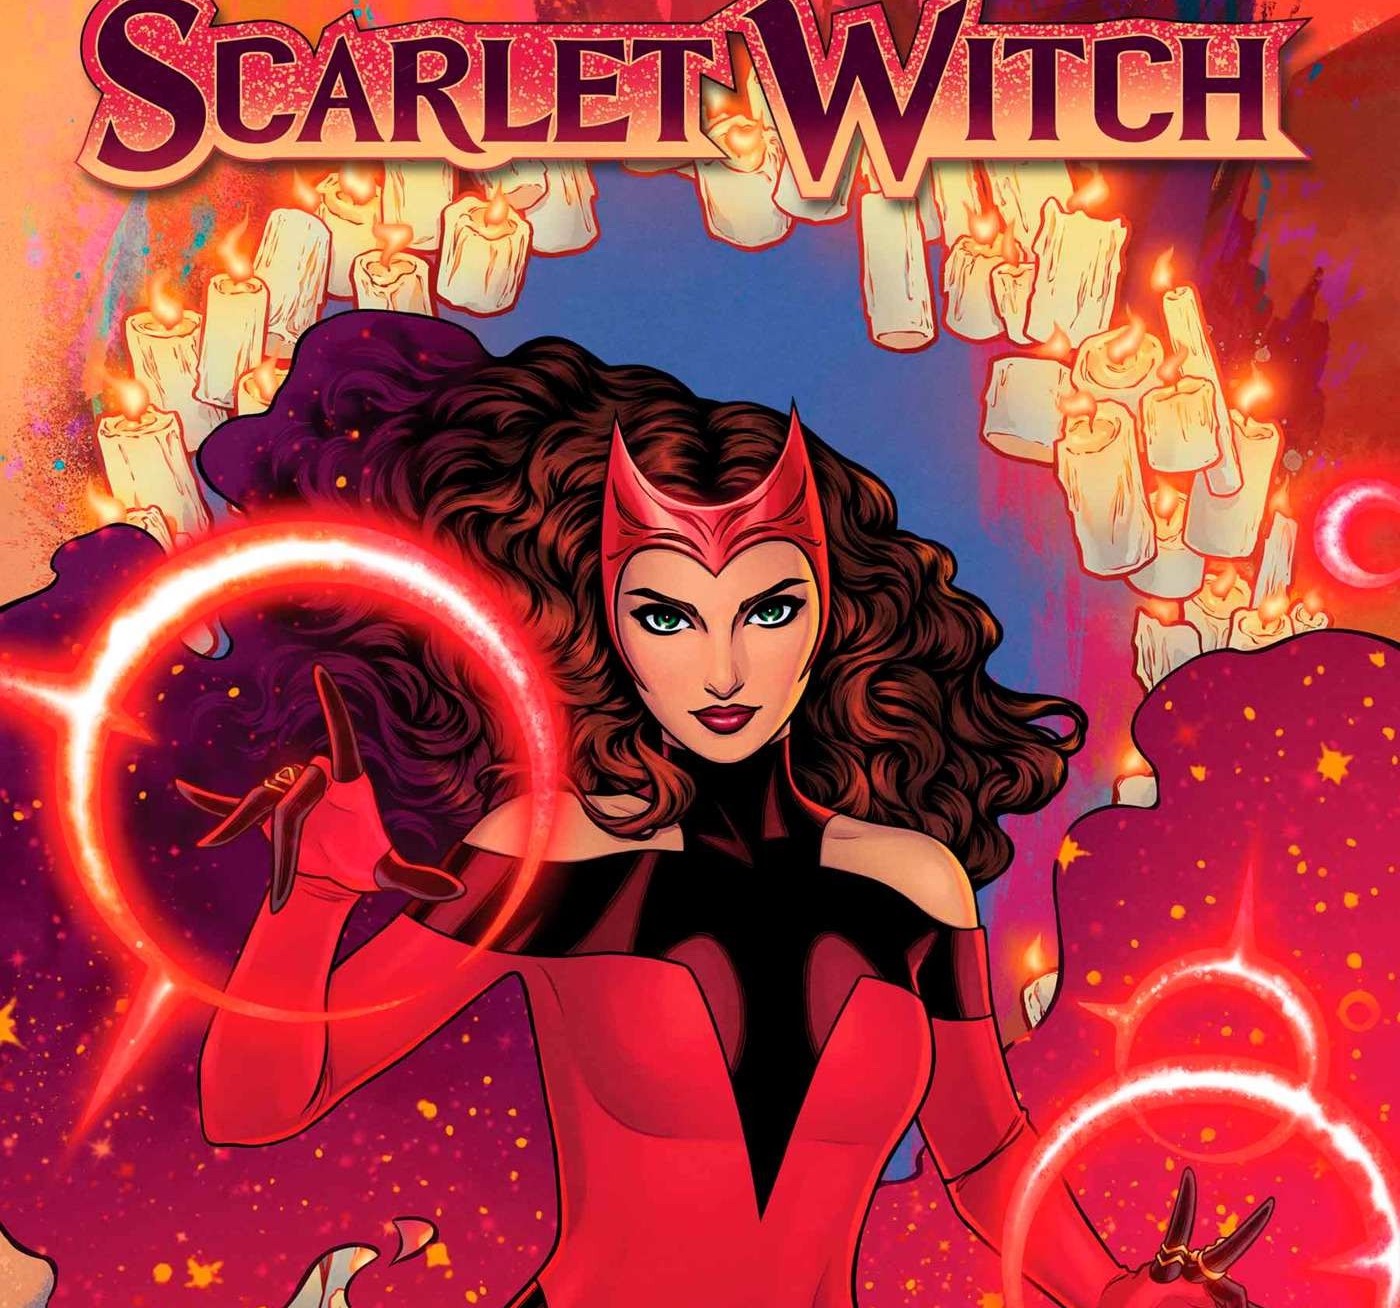 'Scarlet Witch' #1 captures Wanda's humanity perfectly